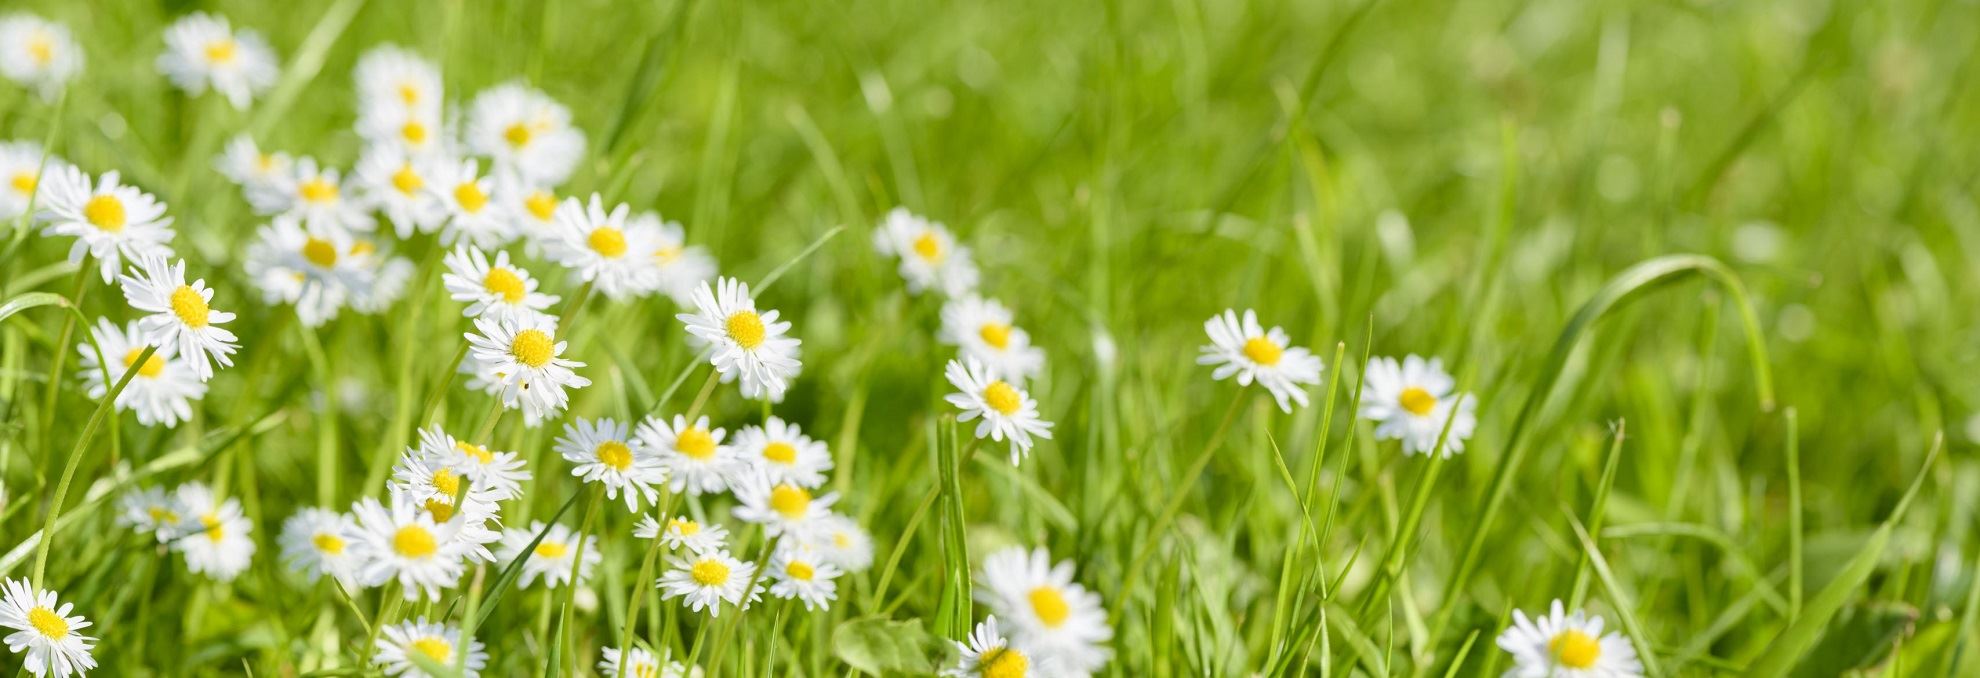 Close up of white flowers in a green field